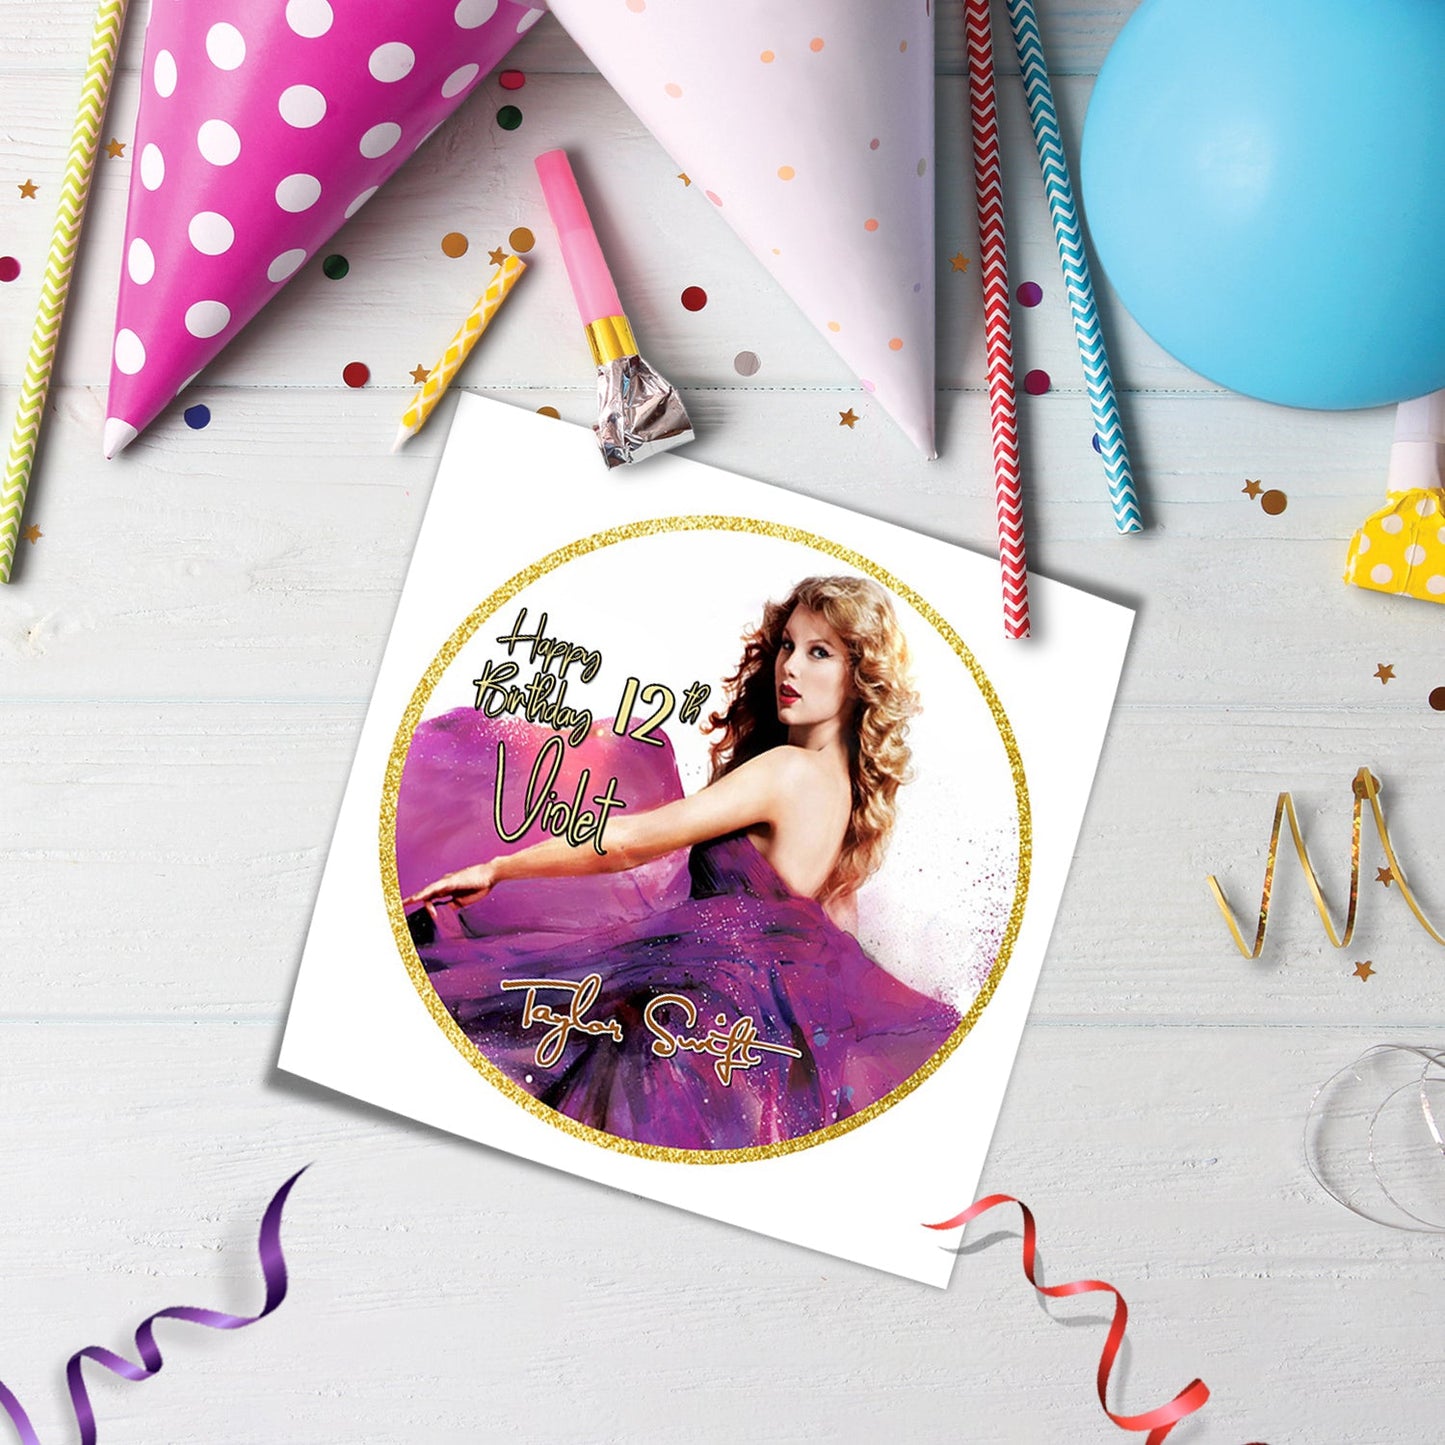 Round Taylor Swift Personalized Cake Images - Add a Personal Touch to Your Cake